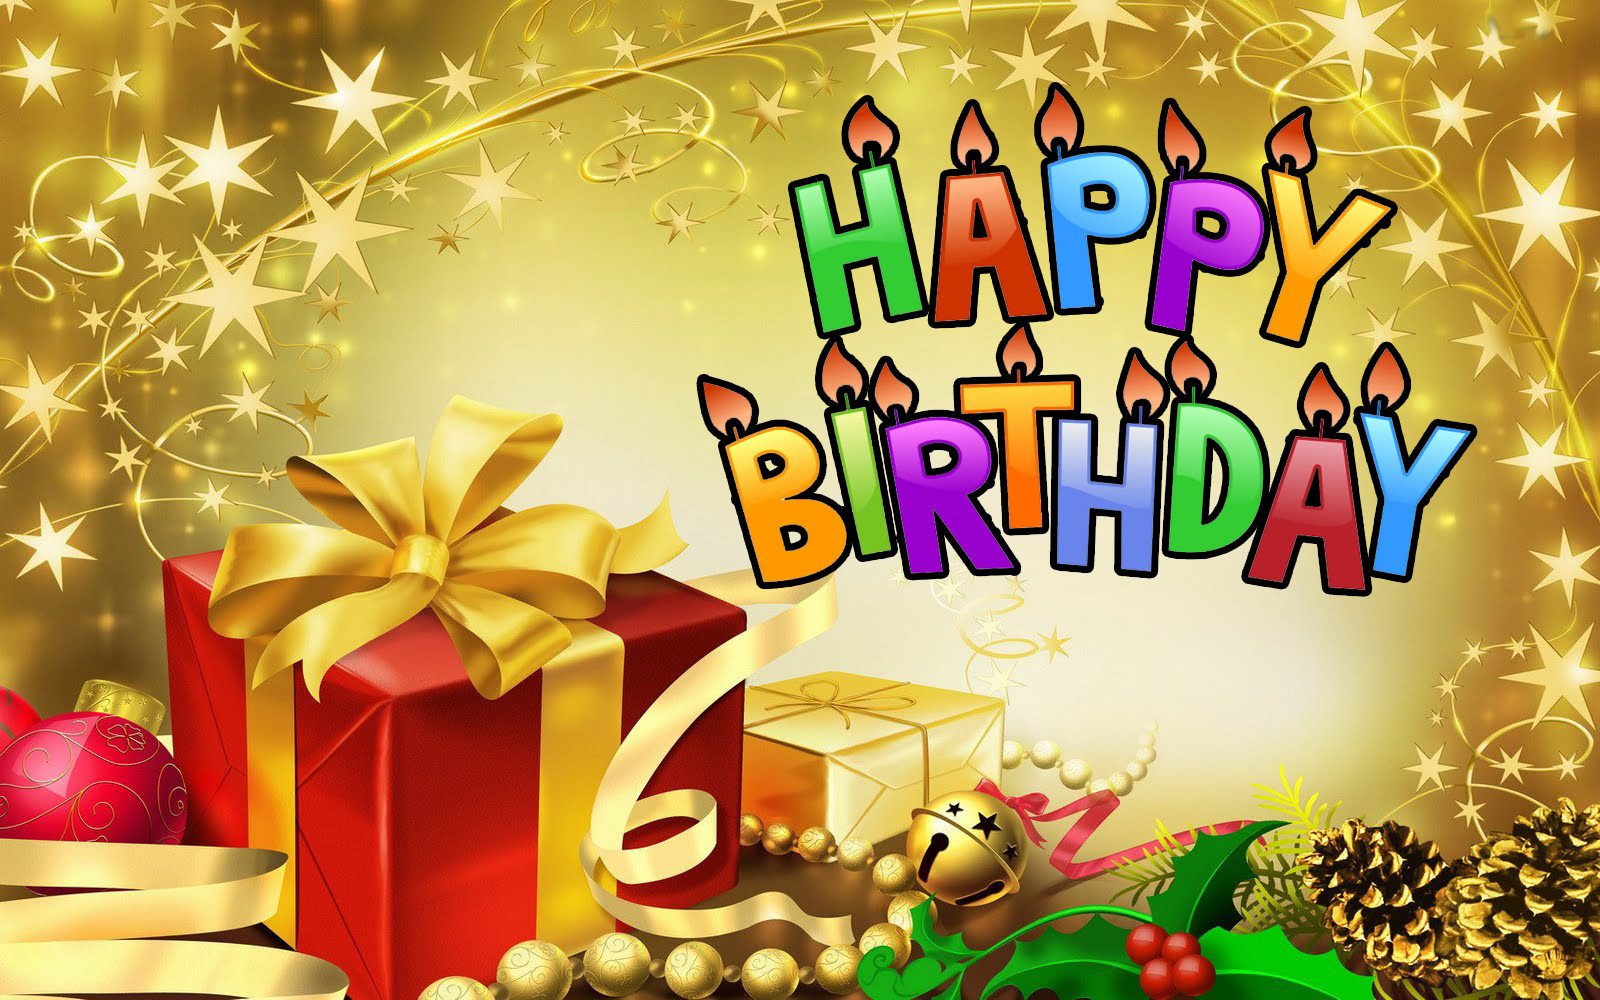 Free Happy Birthday Cards For Facebook
 Happy Birthday Wallpaper for WallpaperSafari